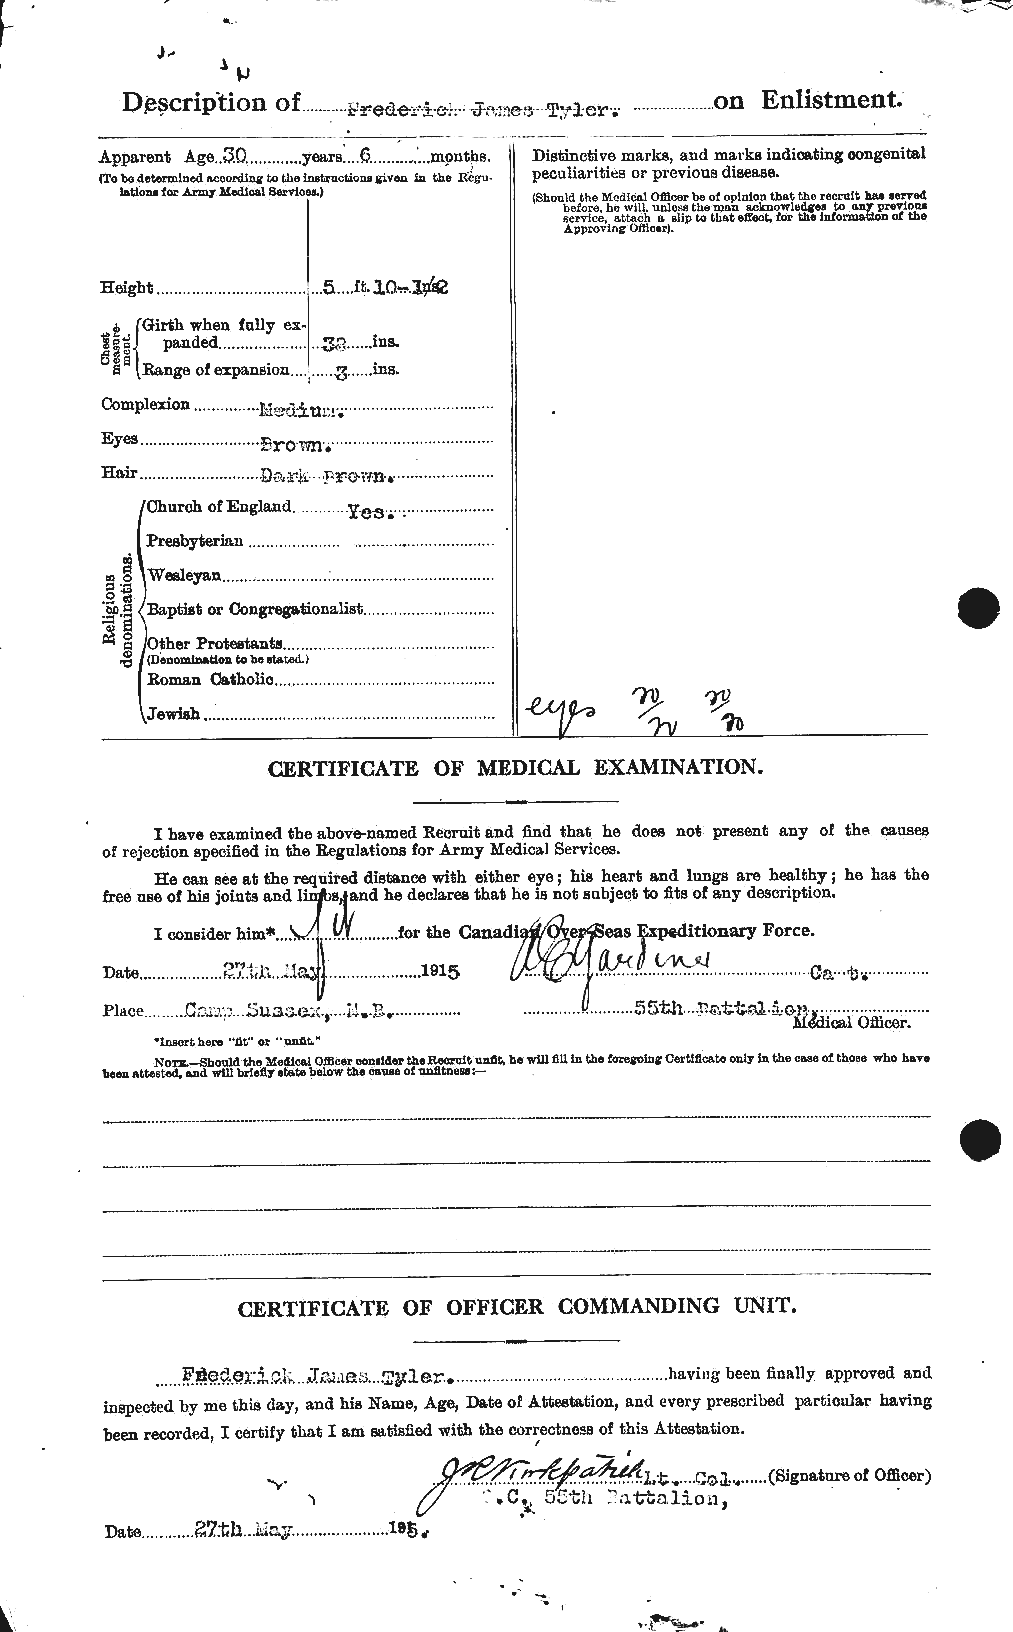 Personnel Records of the First World War - CEF 643710b